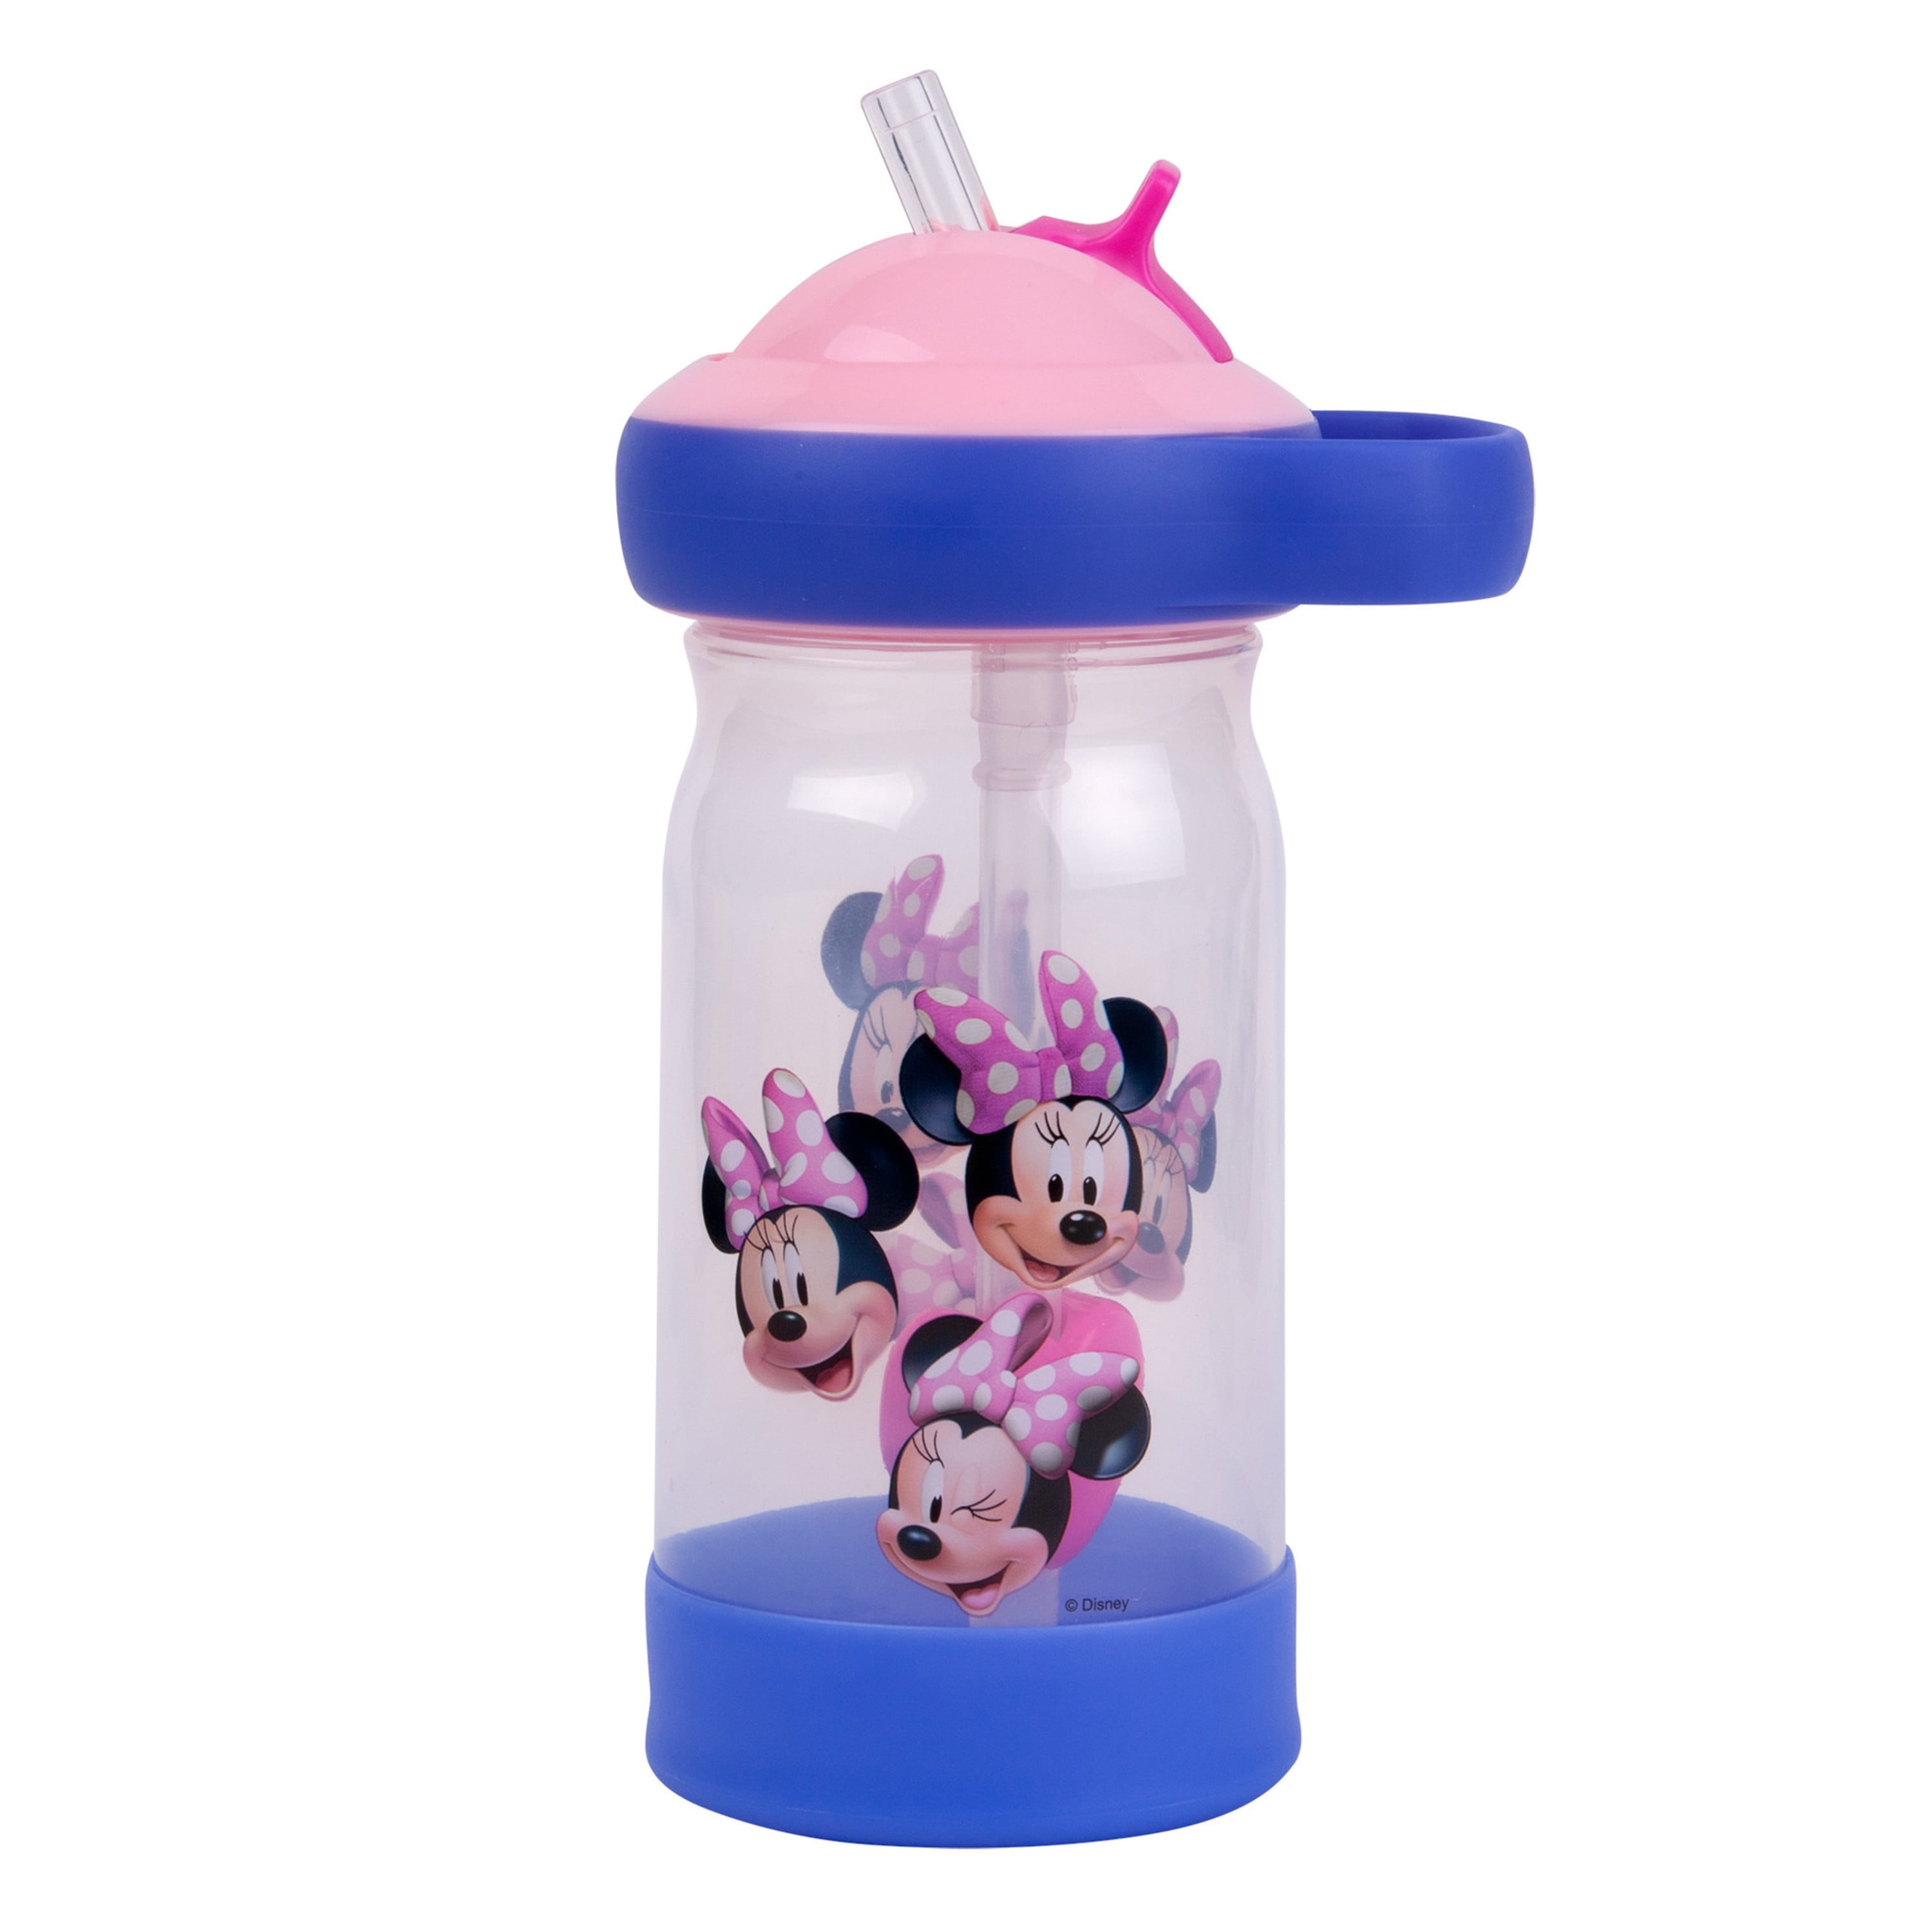 Minnie Mouse Sip & See Toddler Water Bottle w/ Floating Charm 12 Oz